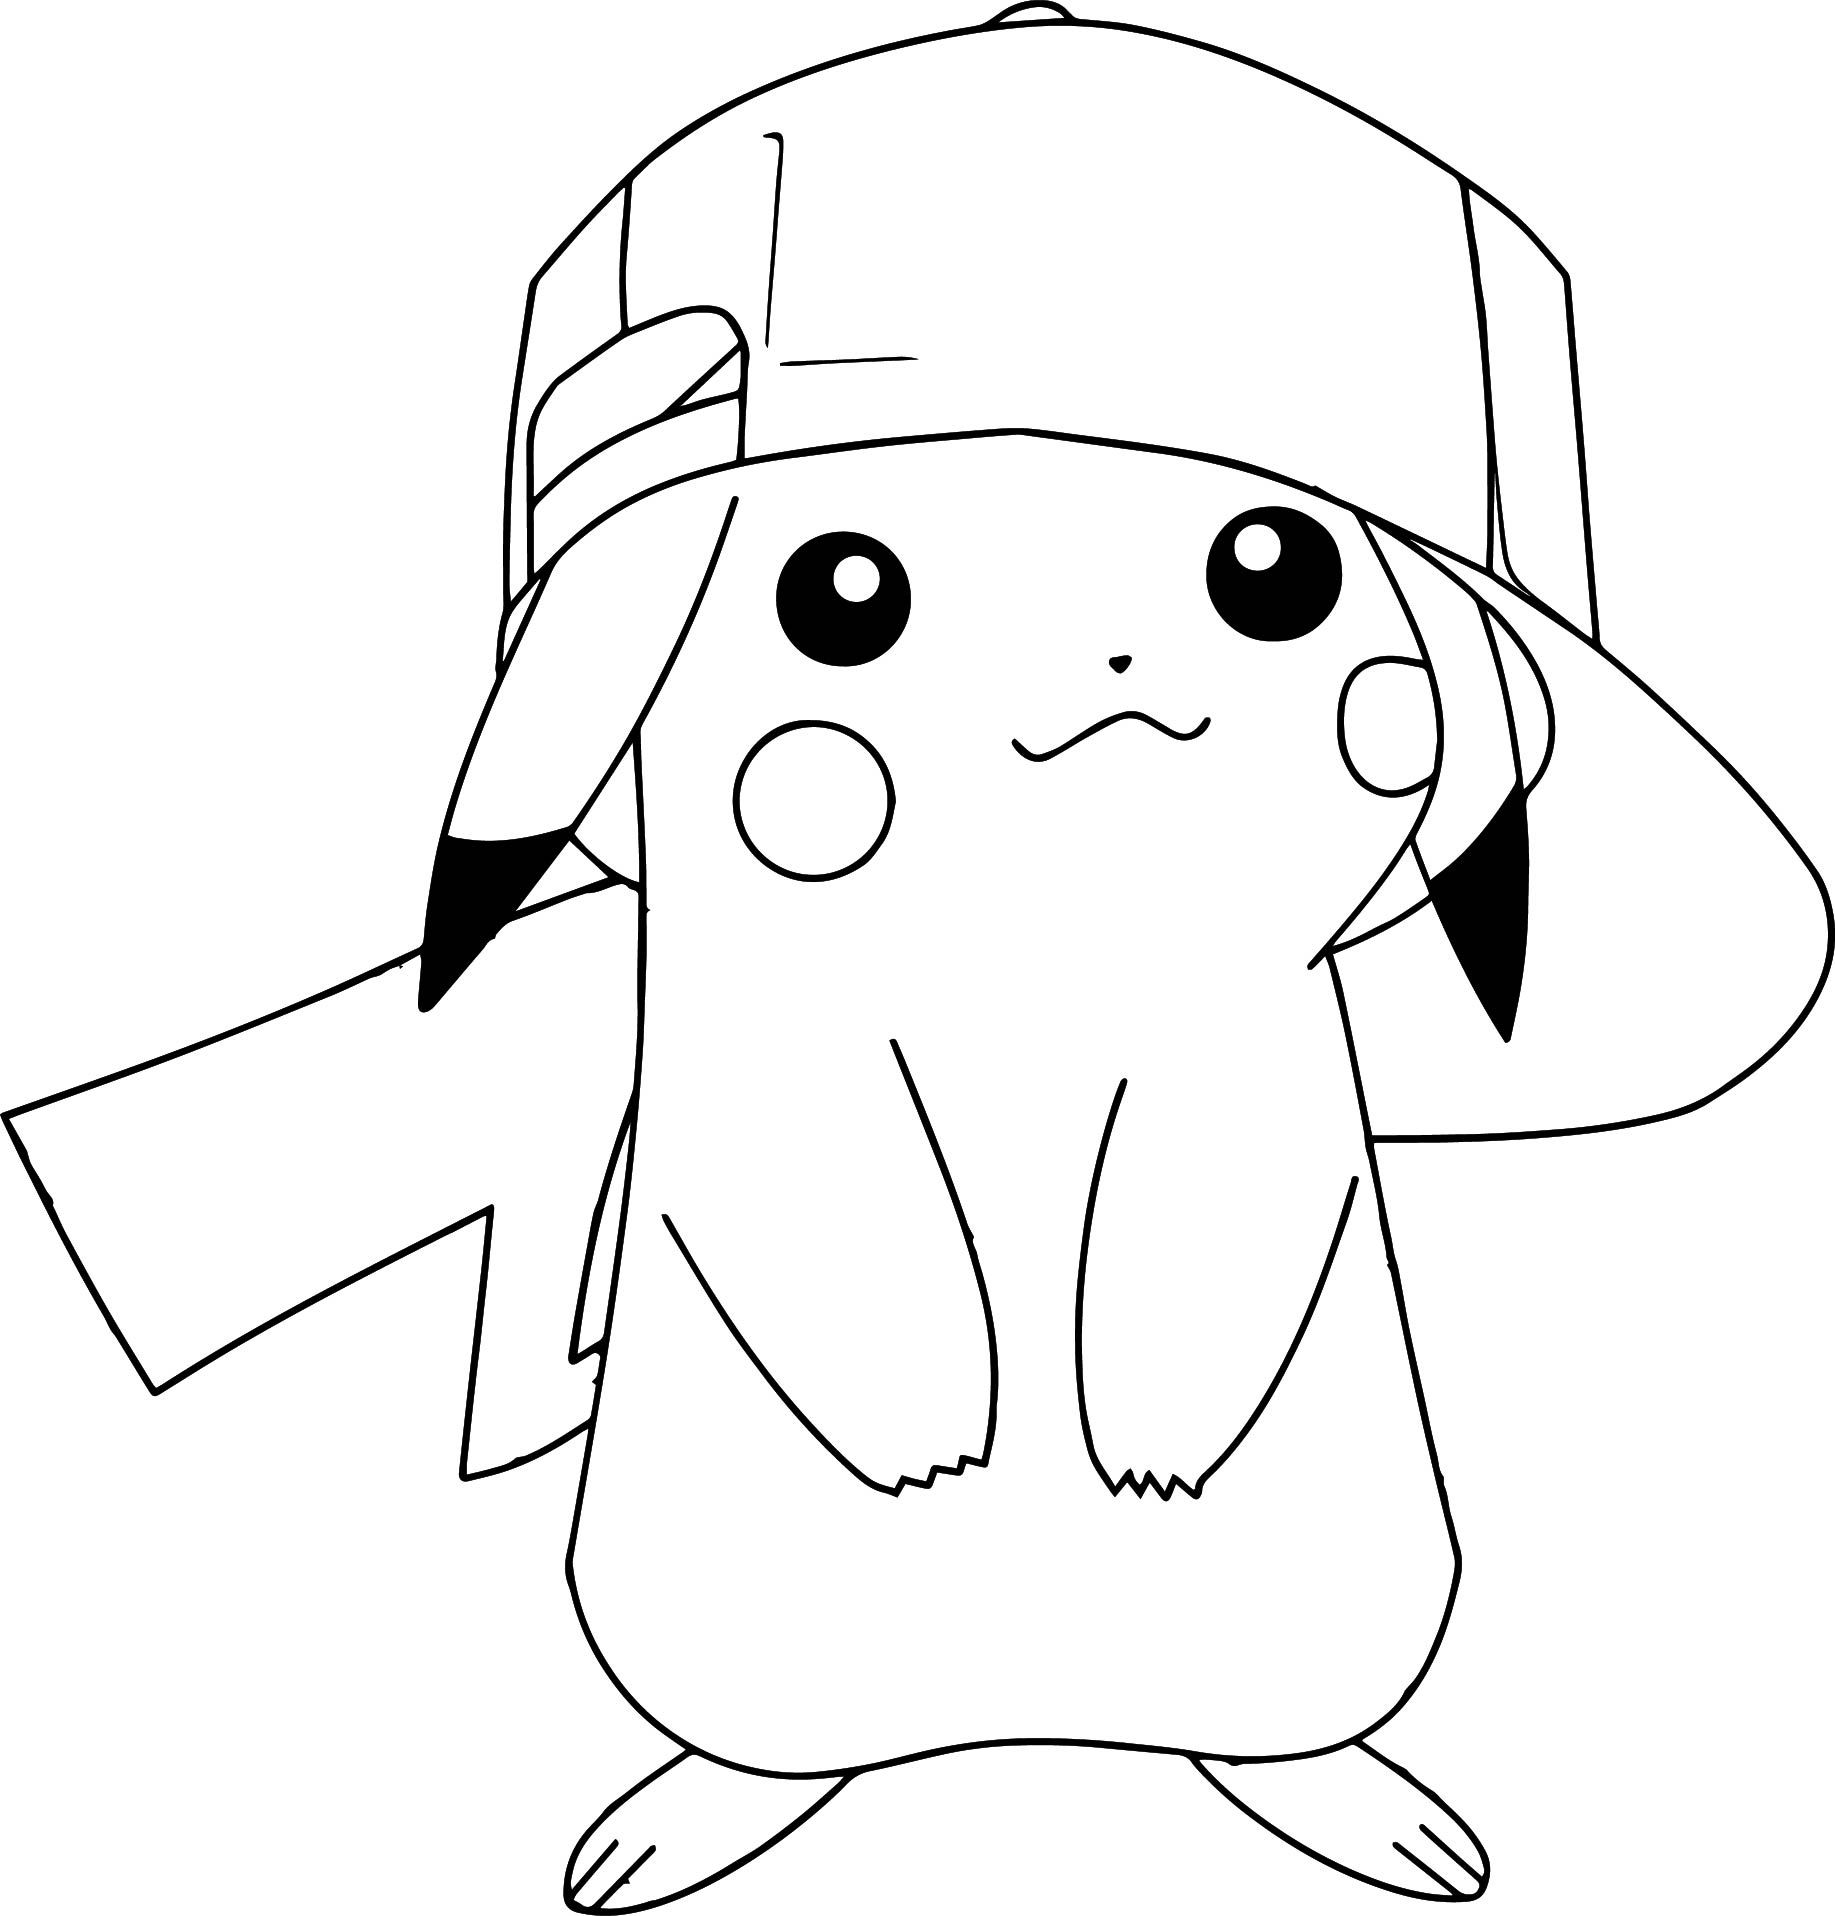 cool pikachu with a hat